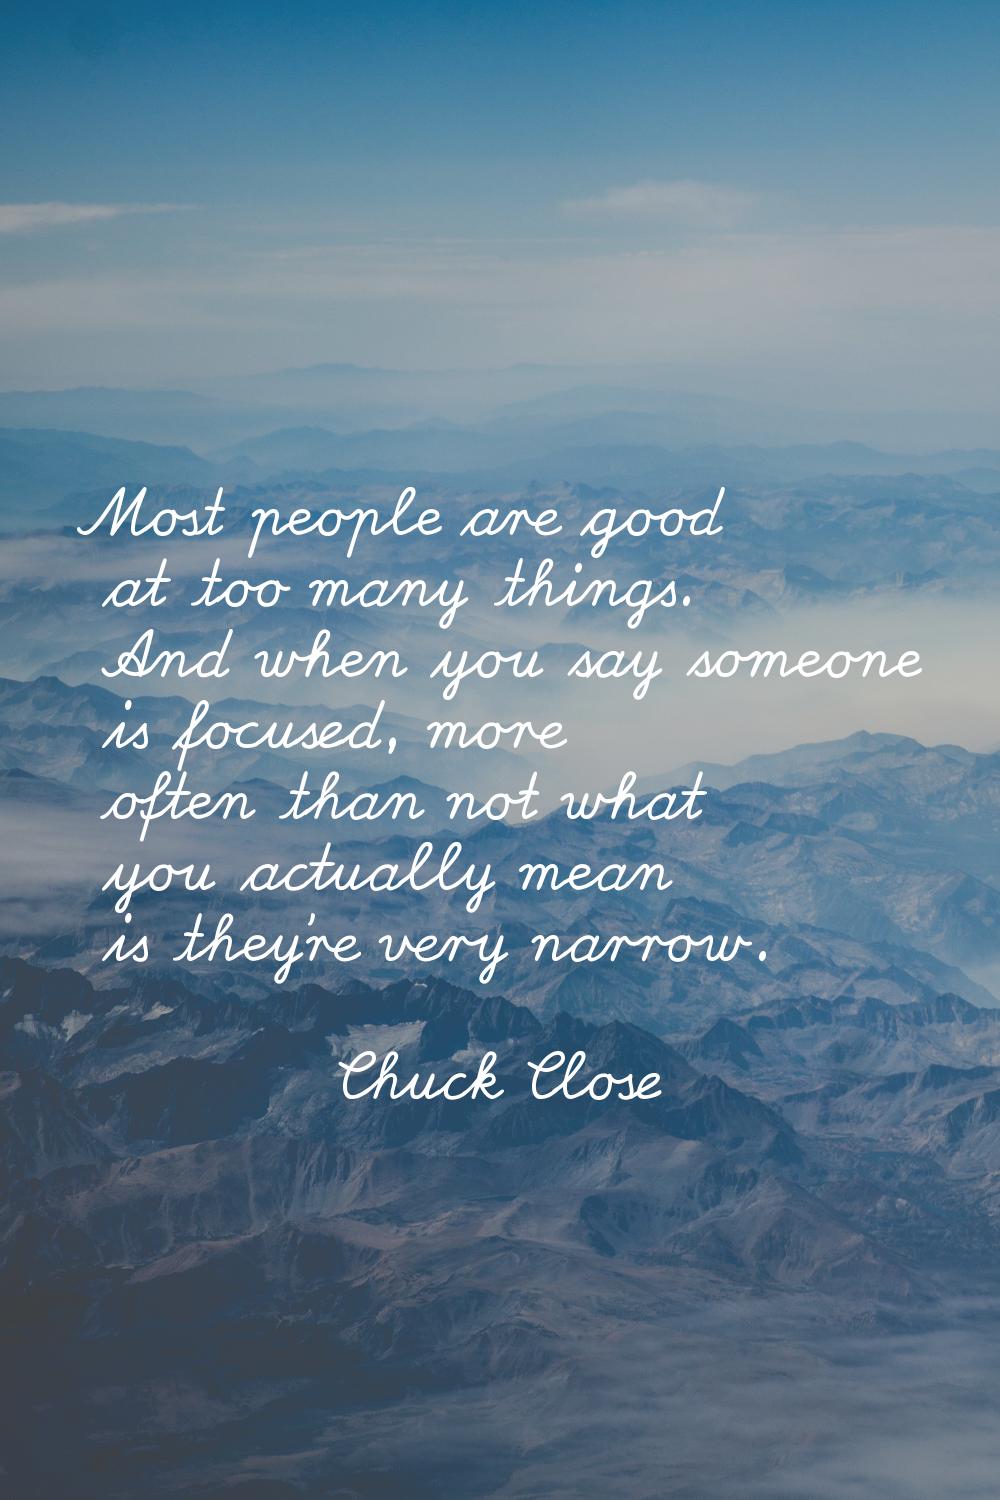 Most people are good at too many things. And when you say someone is focused, more often than not w